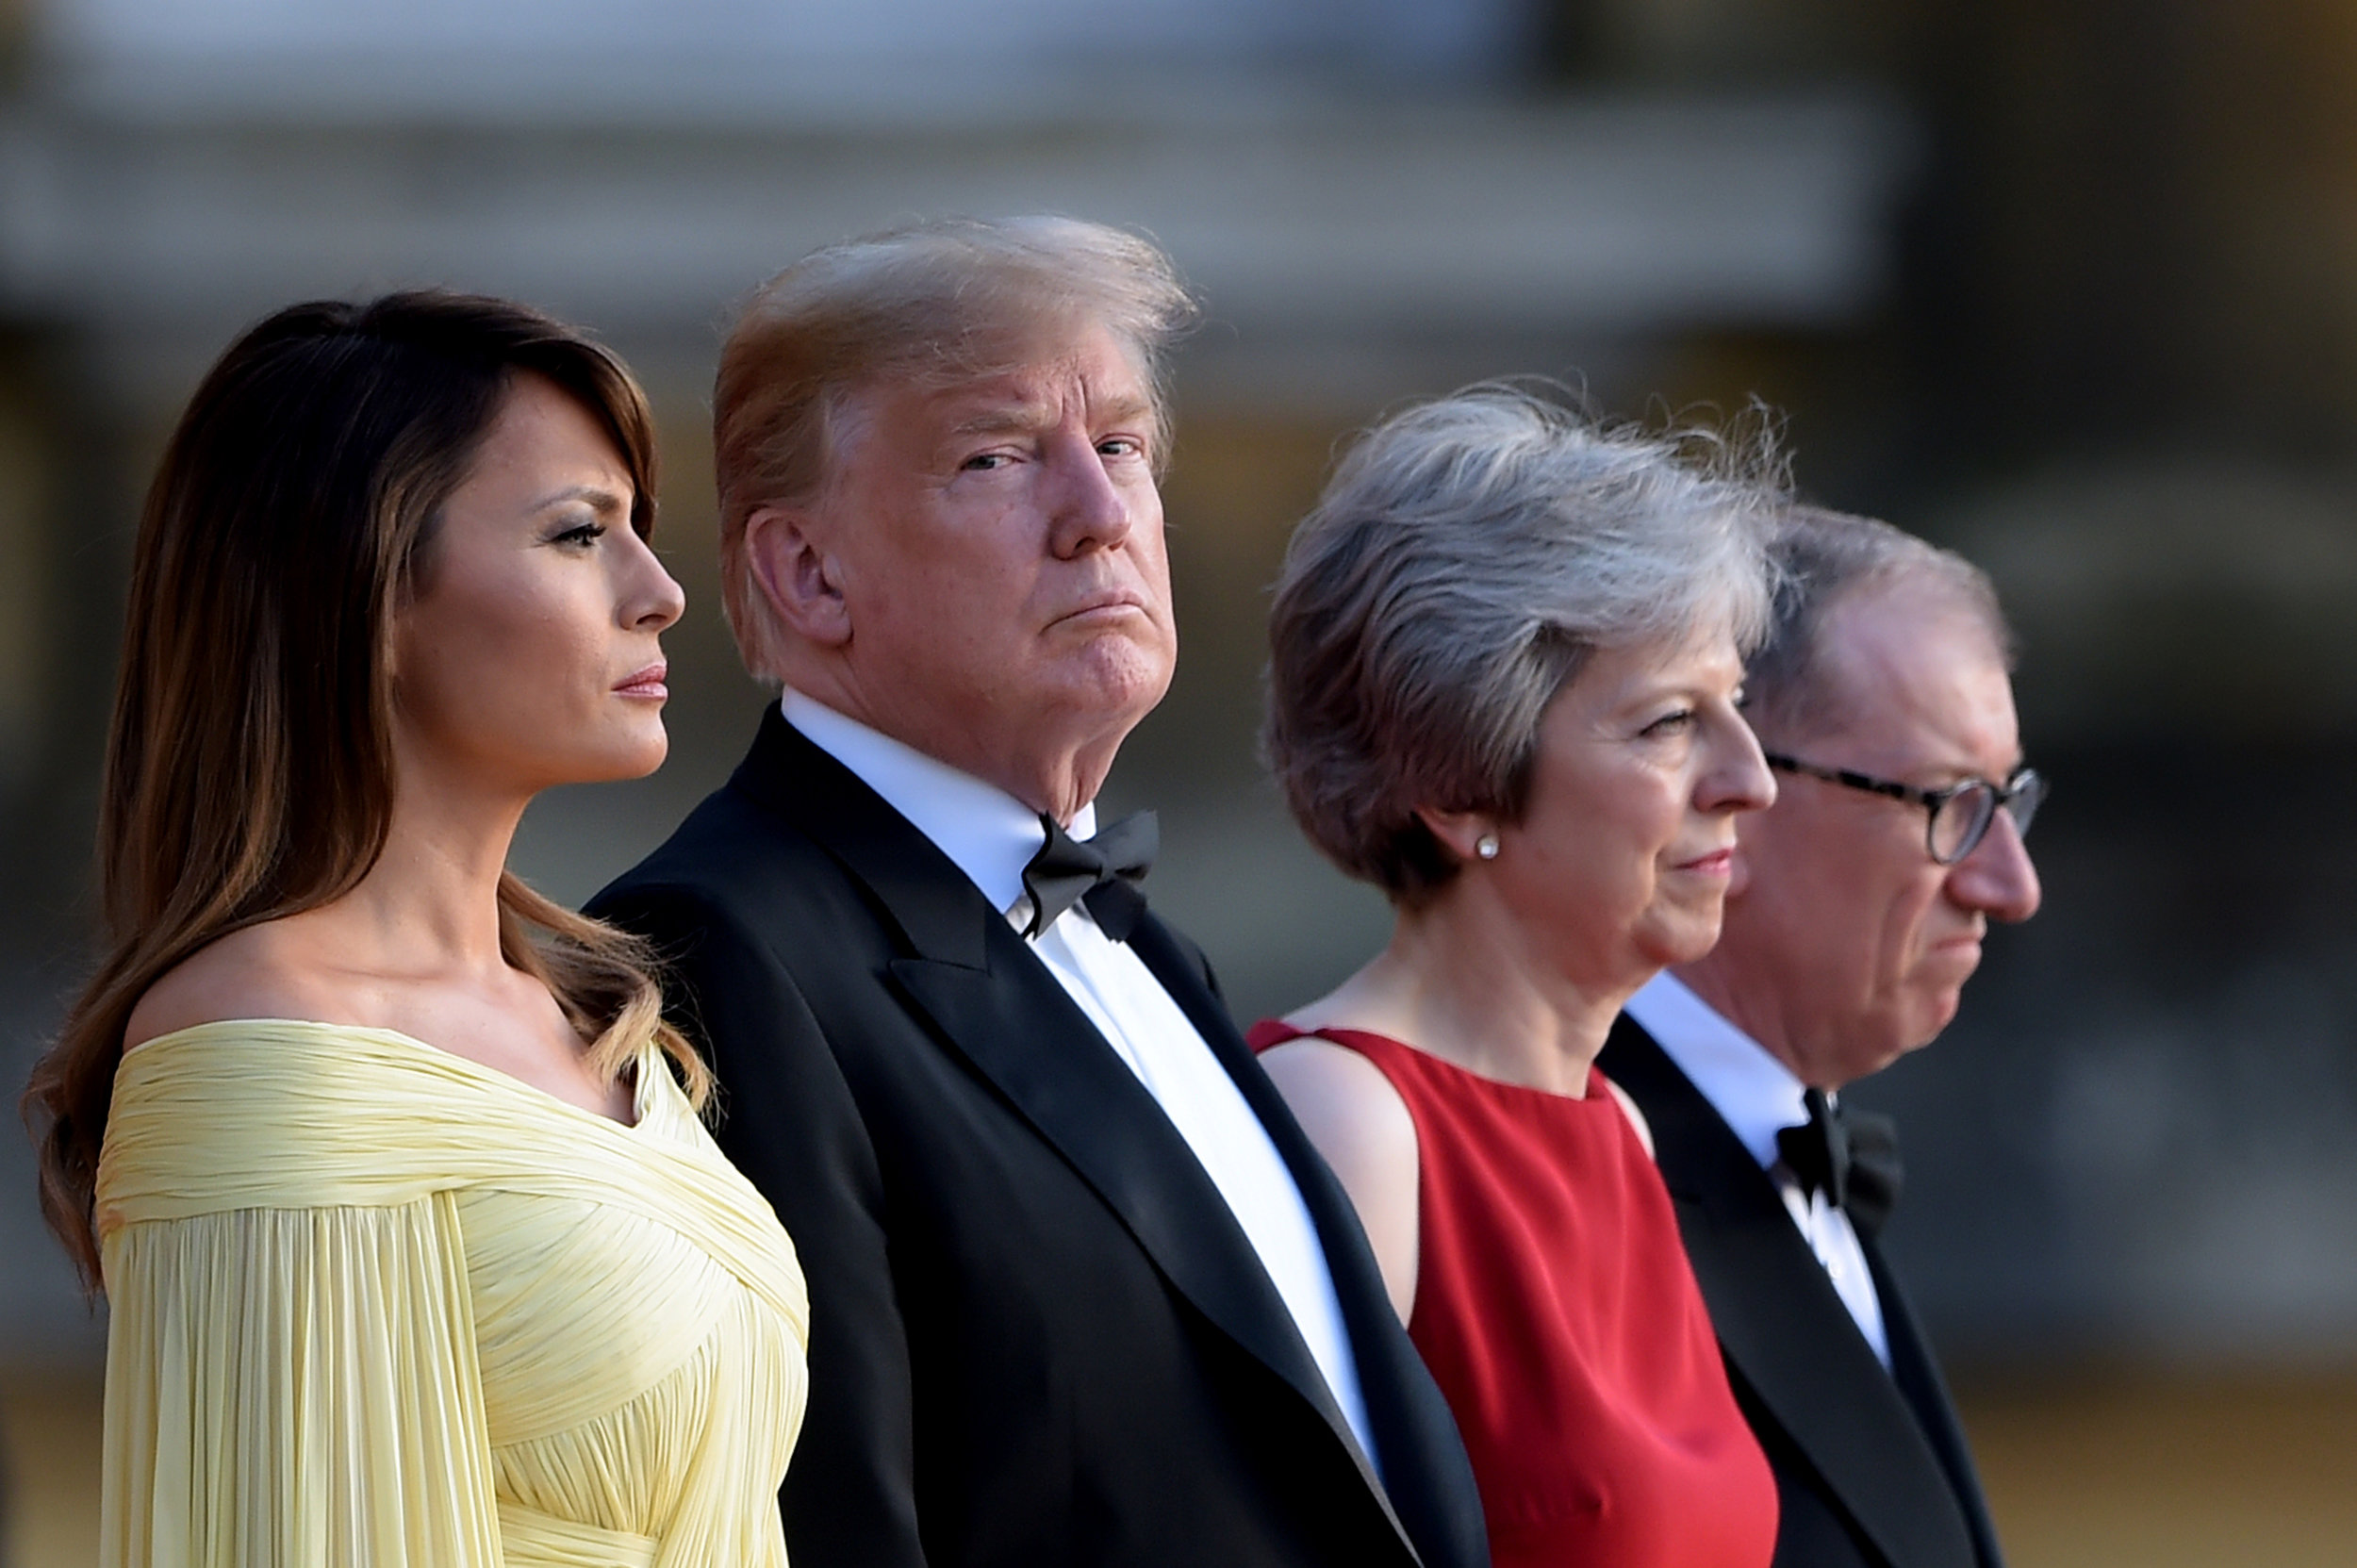  Melania Trump, President Donald Trump, Prime Minister Theresa May, and Philip May at Blenheim Palace, Oxfordshire.
Photo by James Veysey, 12 July 2018
 